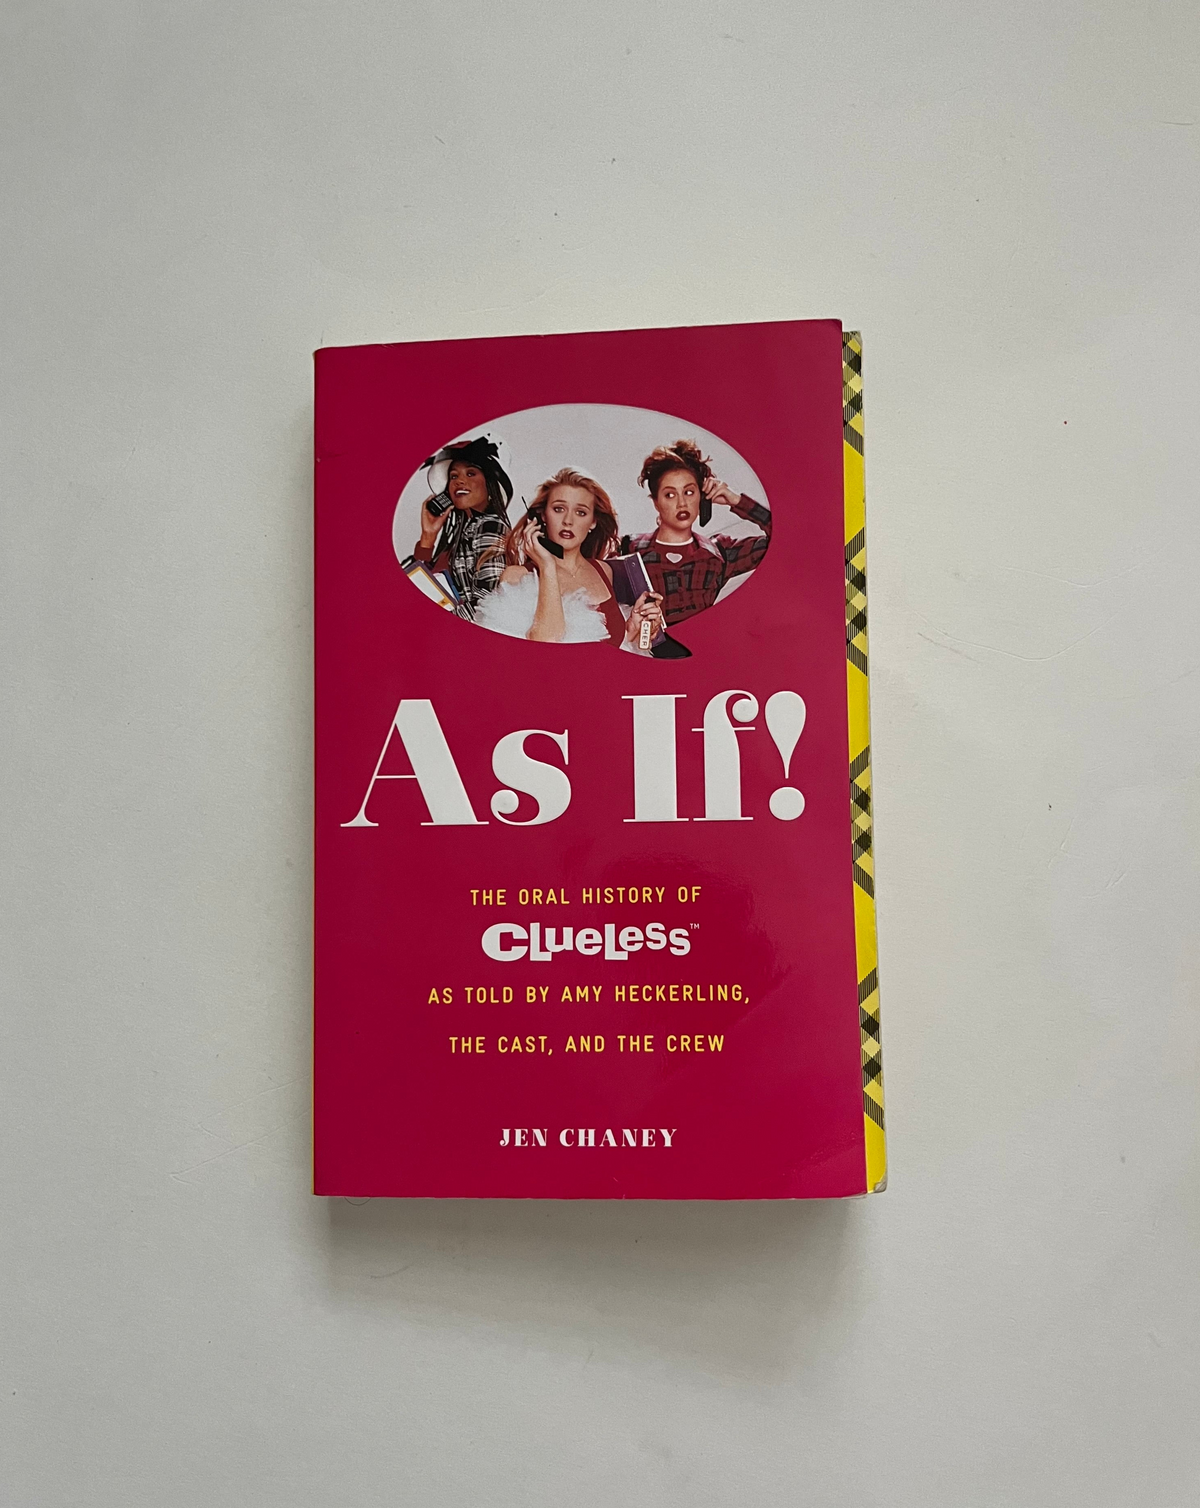 As If!: The Oral History of Clueless as told by Amy Heckerling, The Cast, and The Crew by Jen Chaney